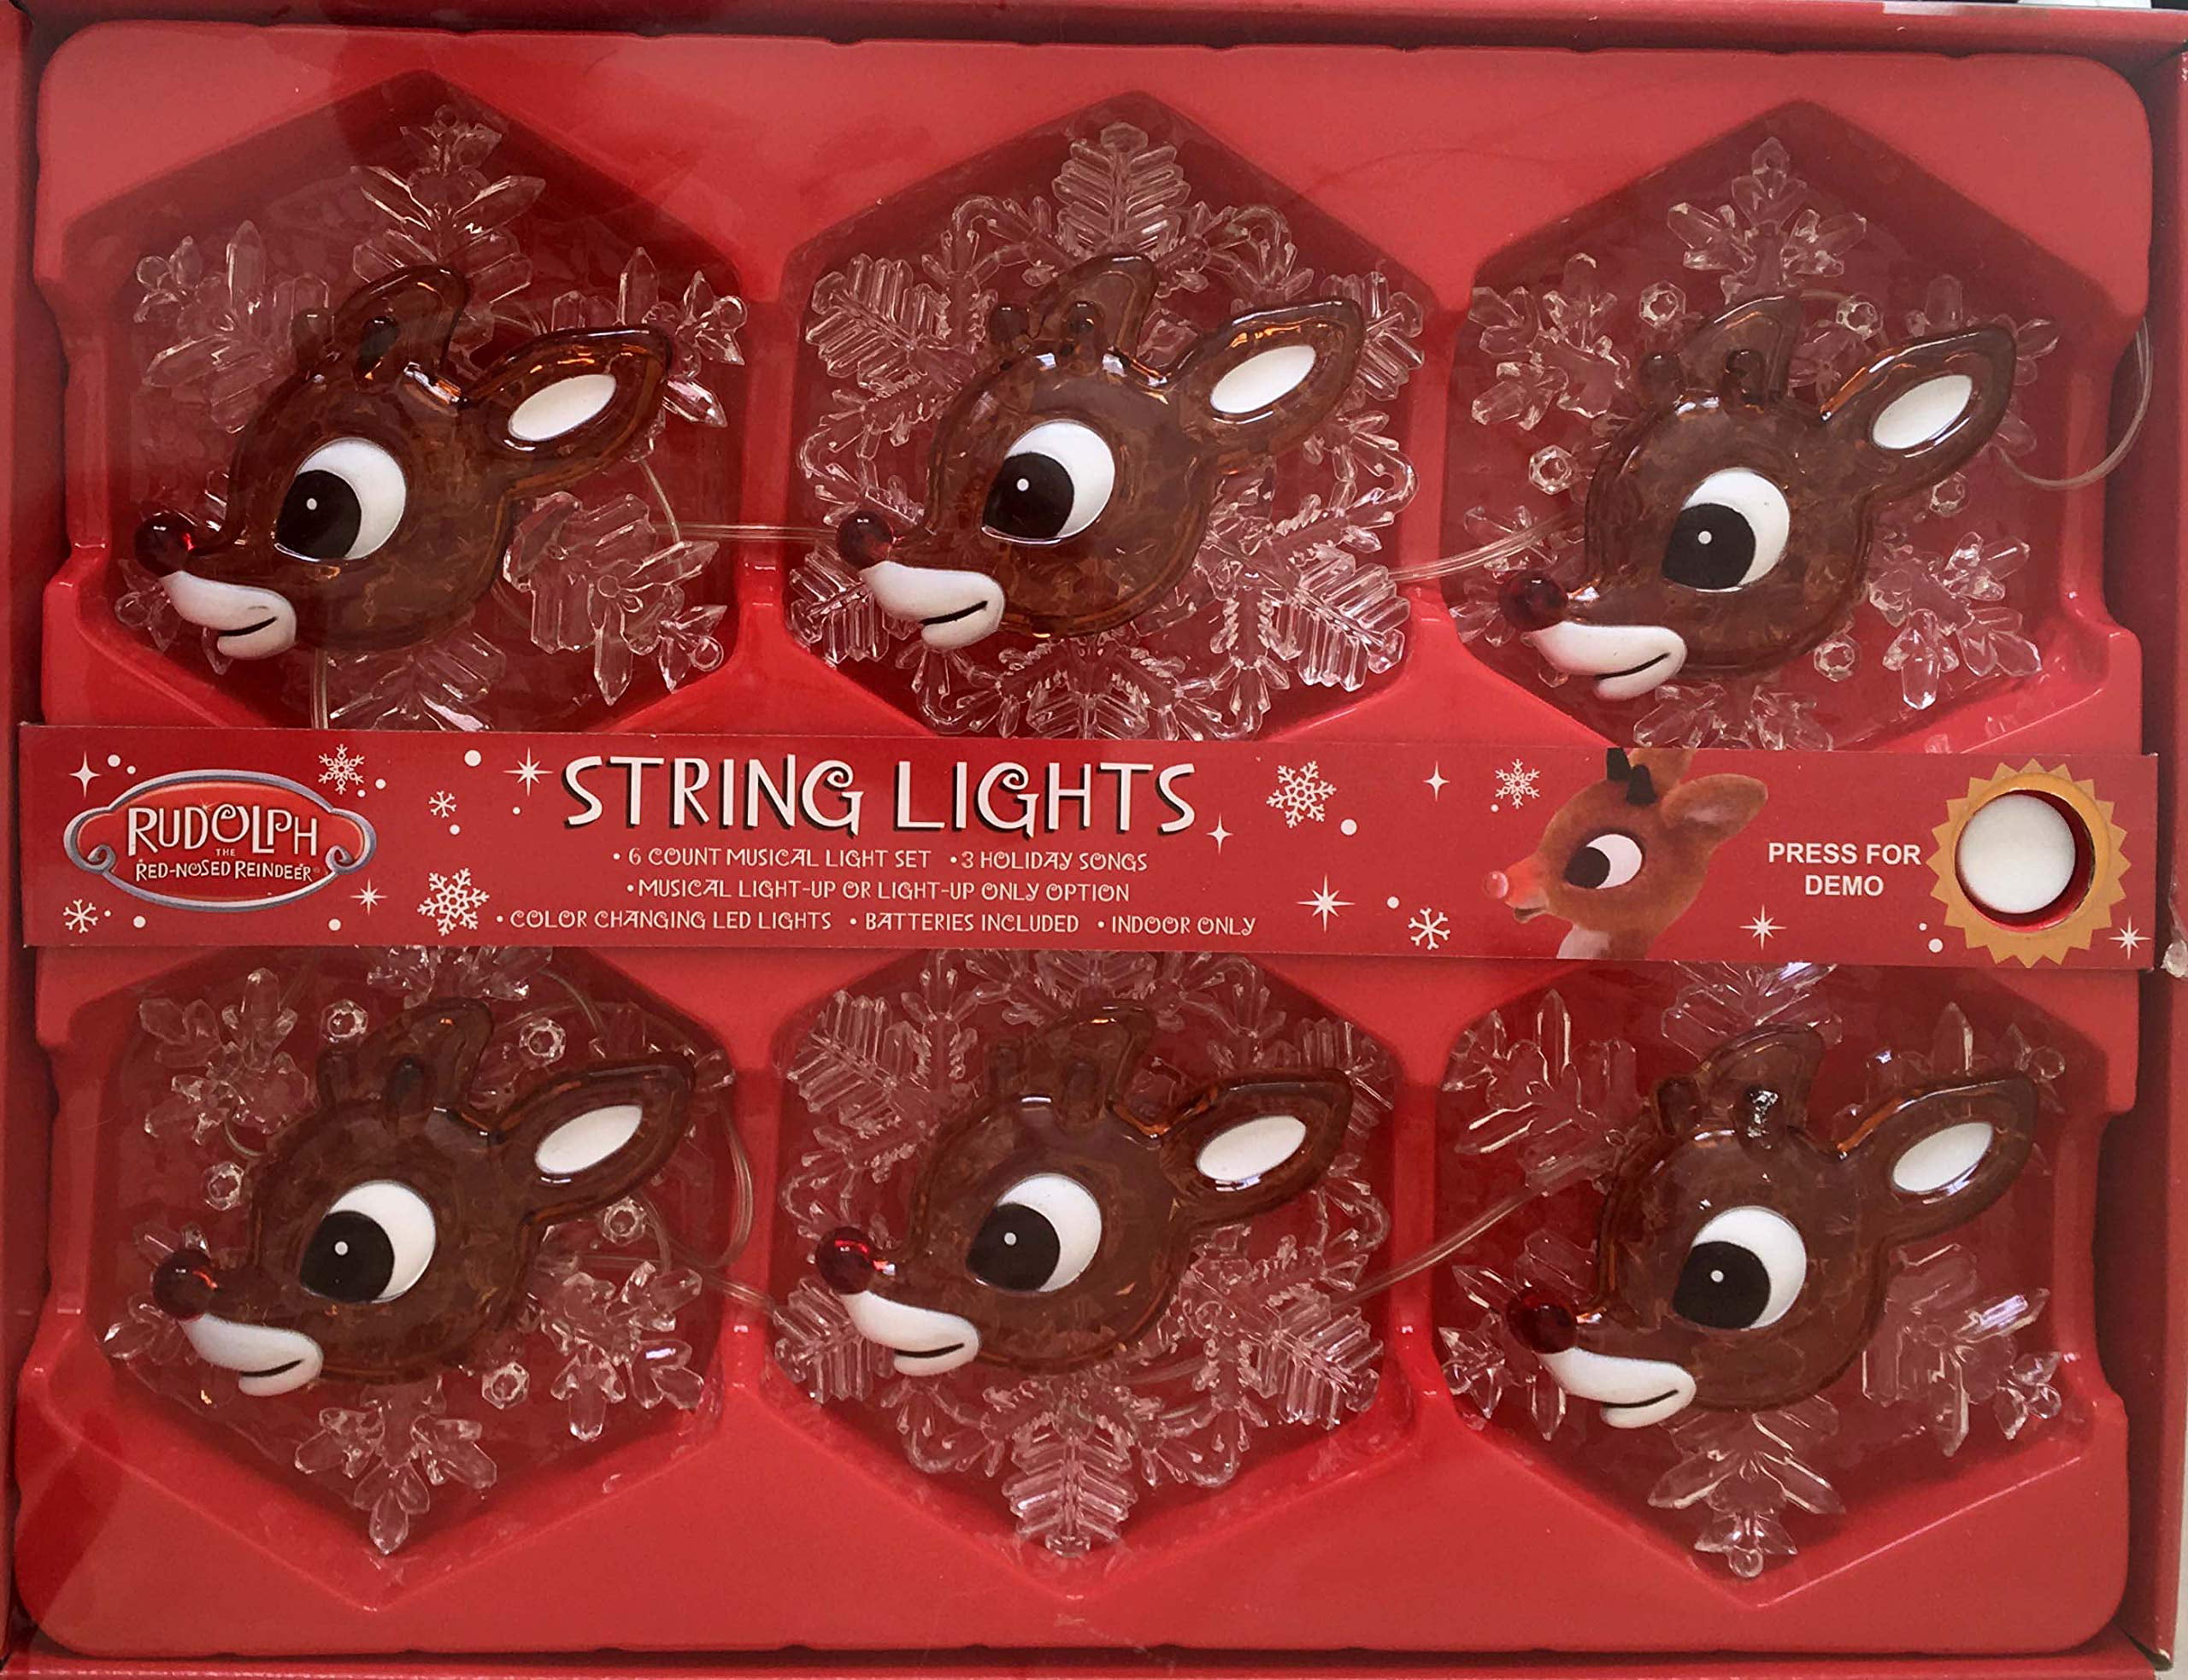 New in Box Christmas Tree Strand Lights Rudolph the Red Nosed Reindeer Music 